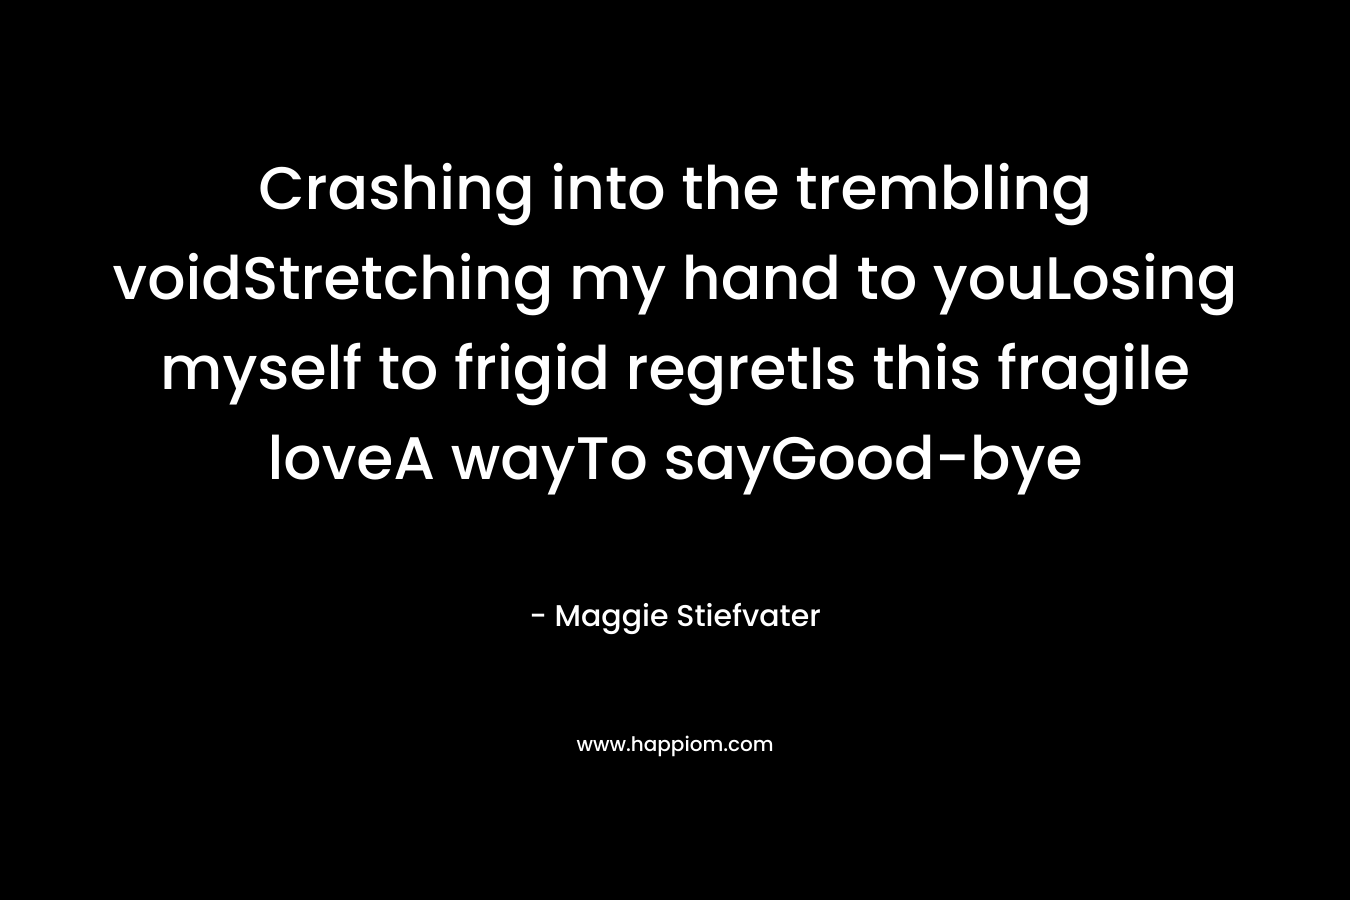 Crashing into the trembling voidStretching my hand to youLosing myself to frigid regretIs this fragile loveA wayTo sayGood-bye – Maggie Stiefvater